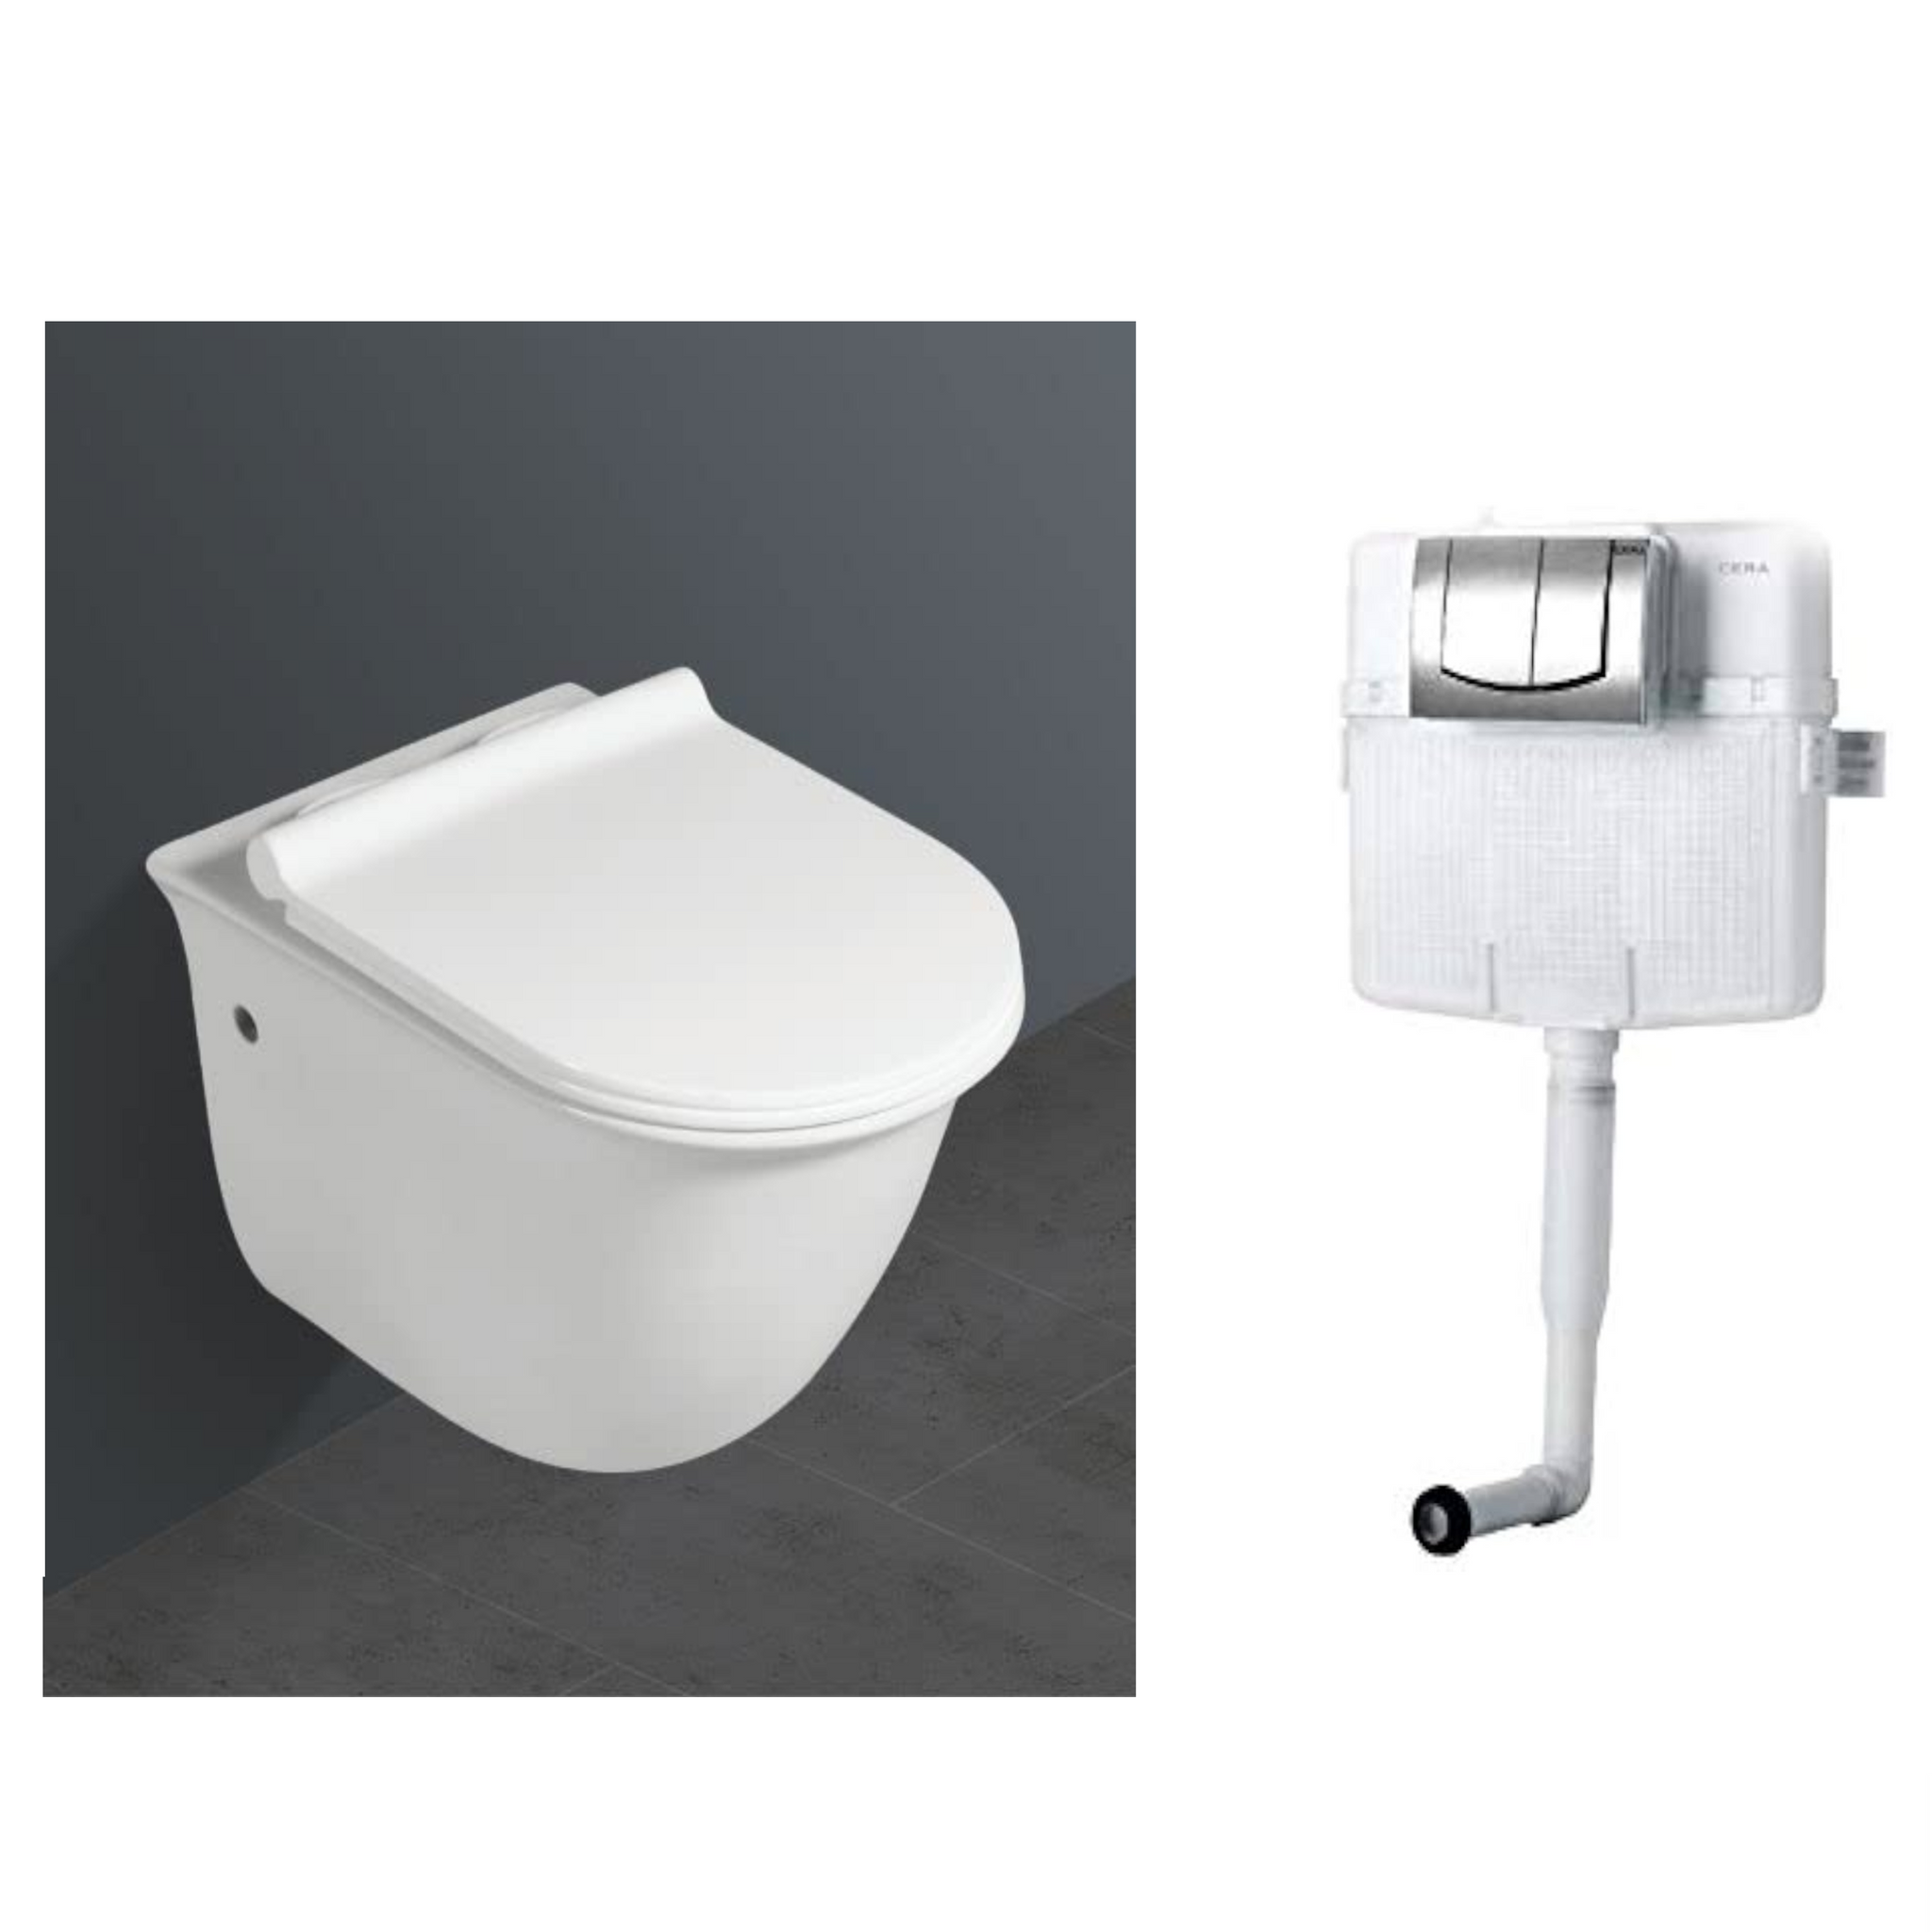 Inart Combo Ceramic Commode Wall Mount/Wall Hung Western Toilet/Commode/Water Closet/EWC/WC/ Commode for Bathrooms Soft Close Seat Cover and Concealed Flush Tank - InArt-Studio